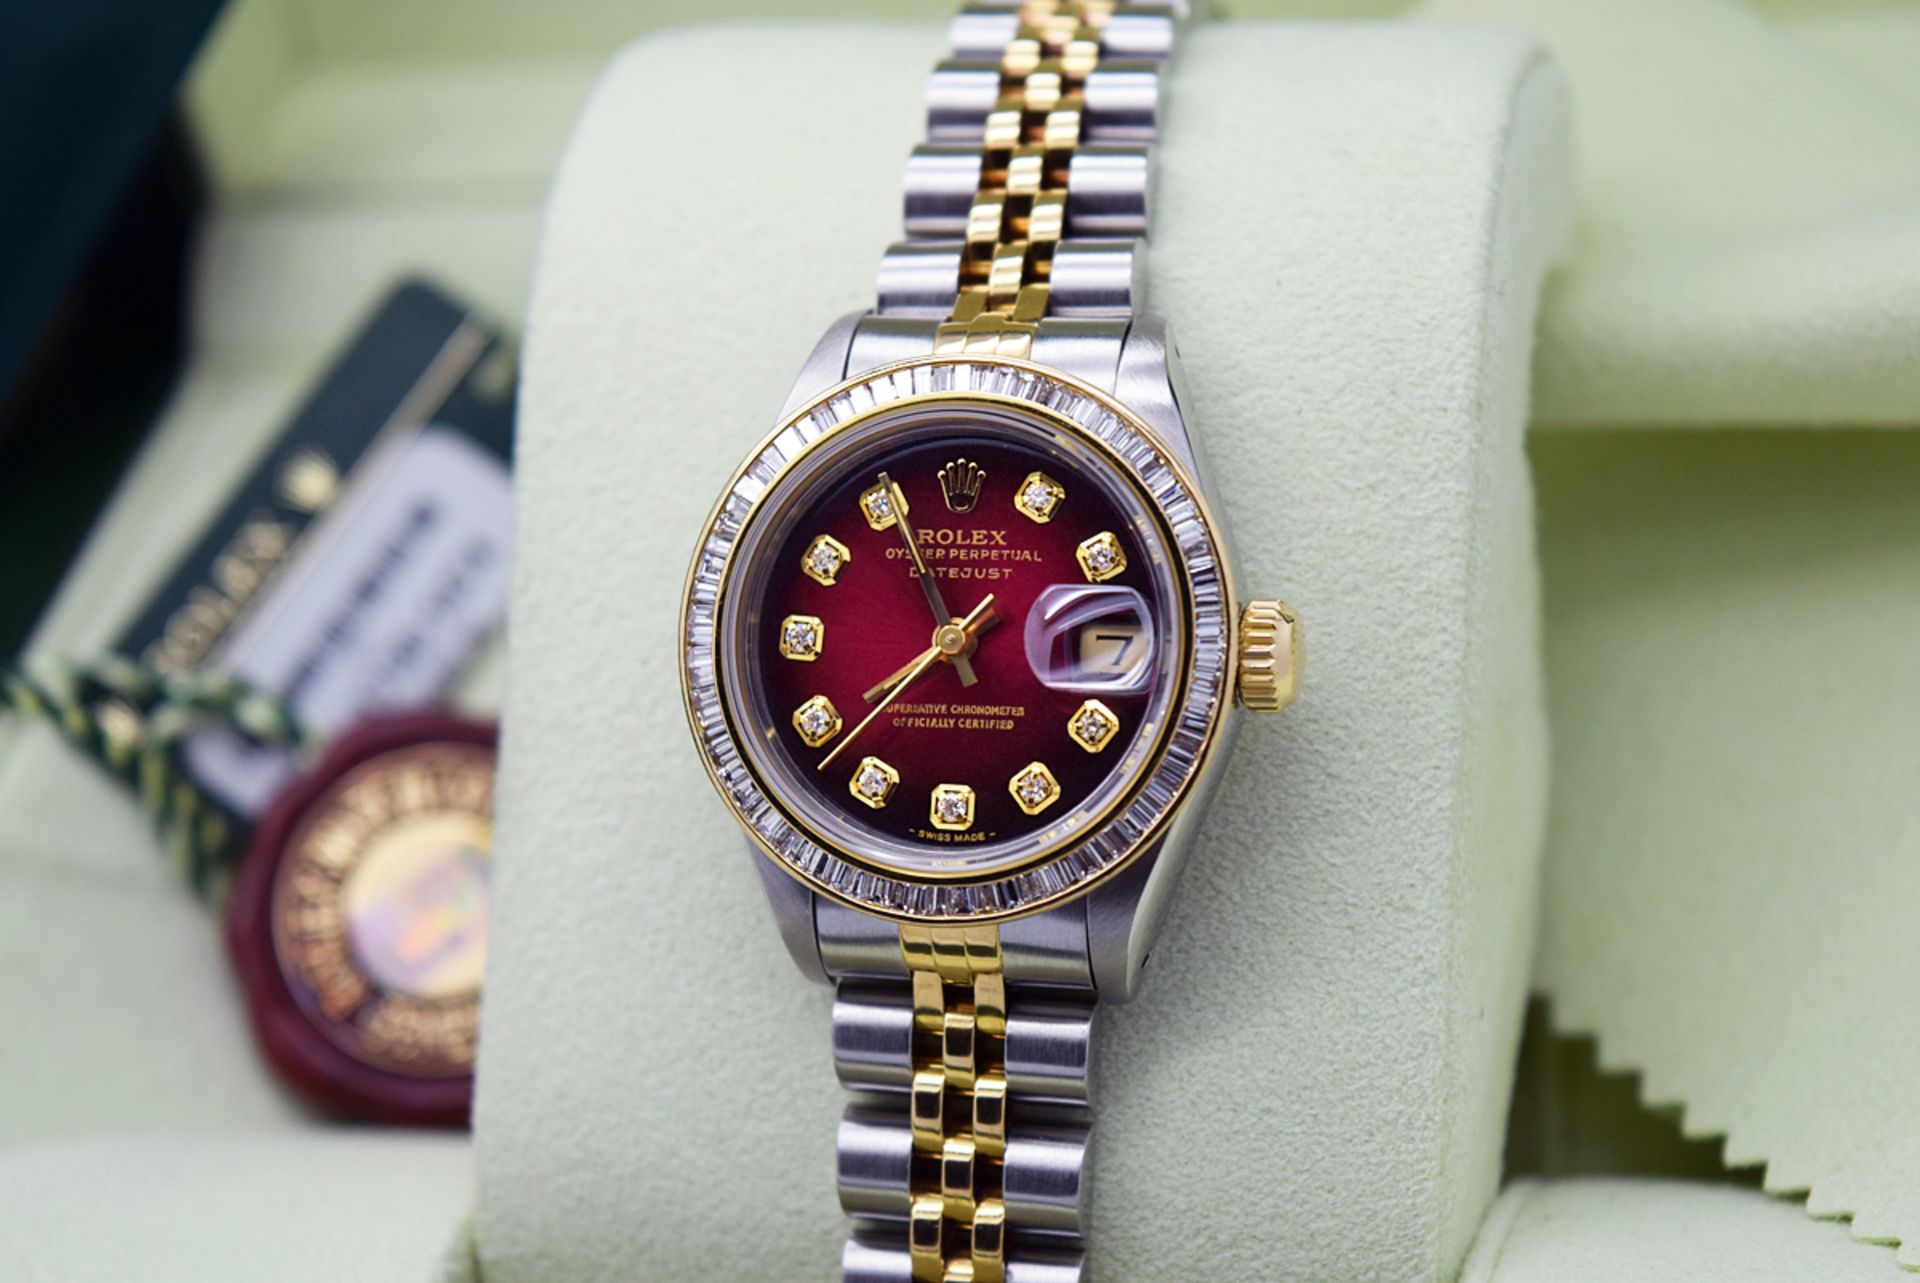 *STUNNING* ROLEX DATEJUST 18K Gold & Stainless Steel - Baguette Diamond Bezel and Diamond Dial - Image 4 of 11